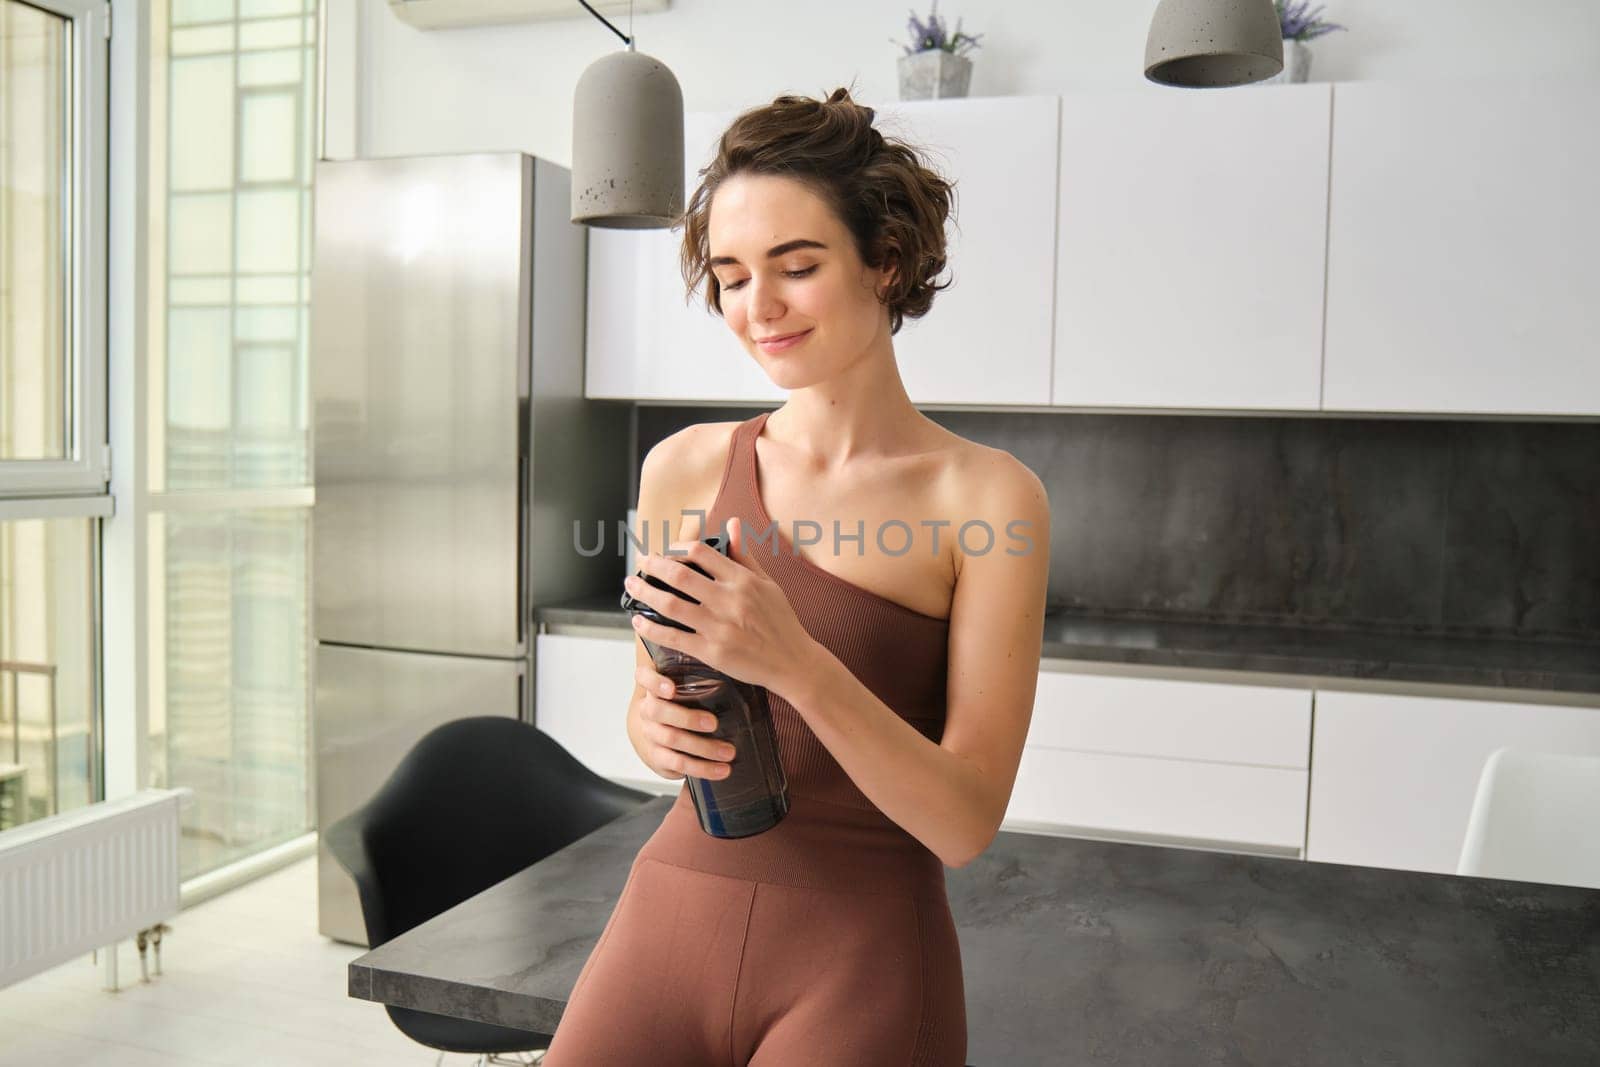 Sport and healthy lifestyle. Portrait of smiling fitness woman in activewear, standing near kitchen counter at home, drinking from water bottle, preparing for workout gym training.